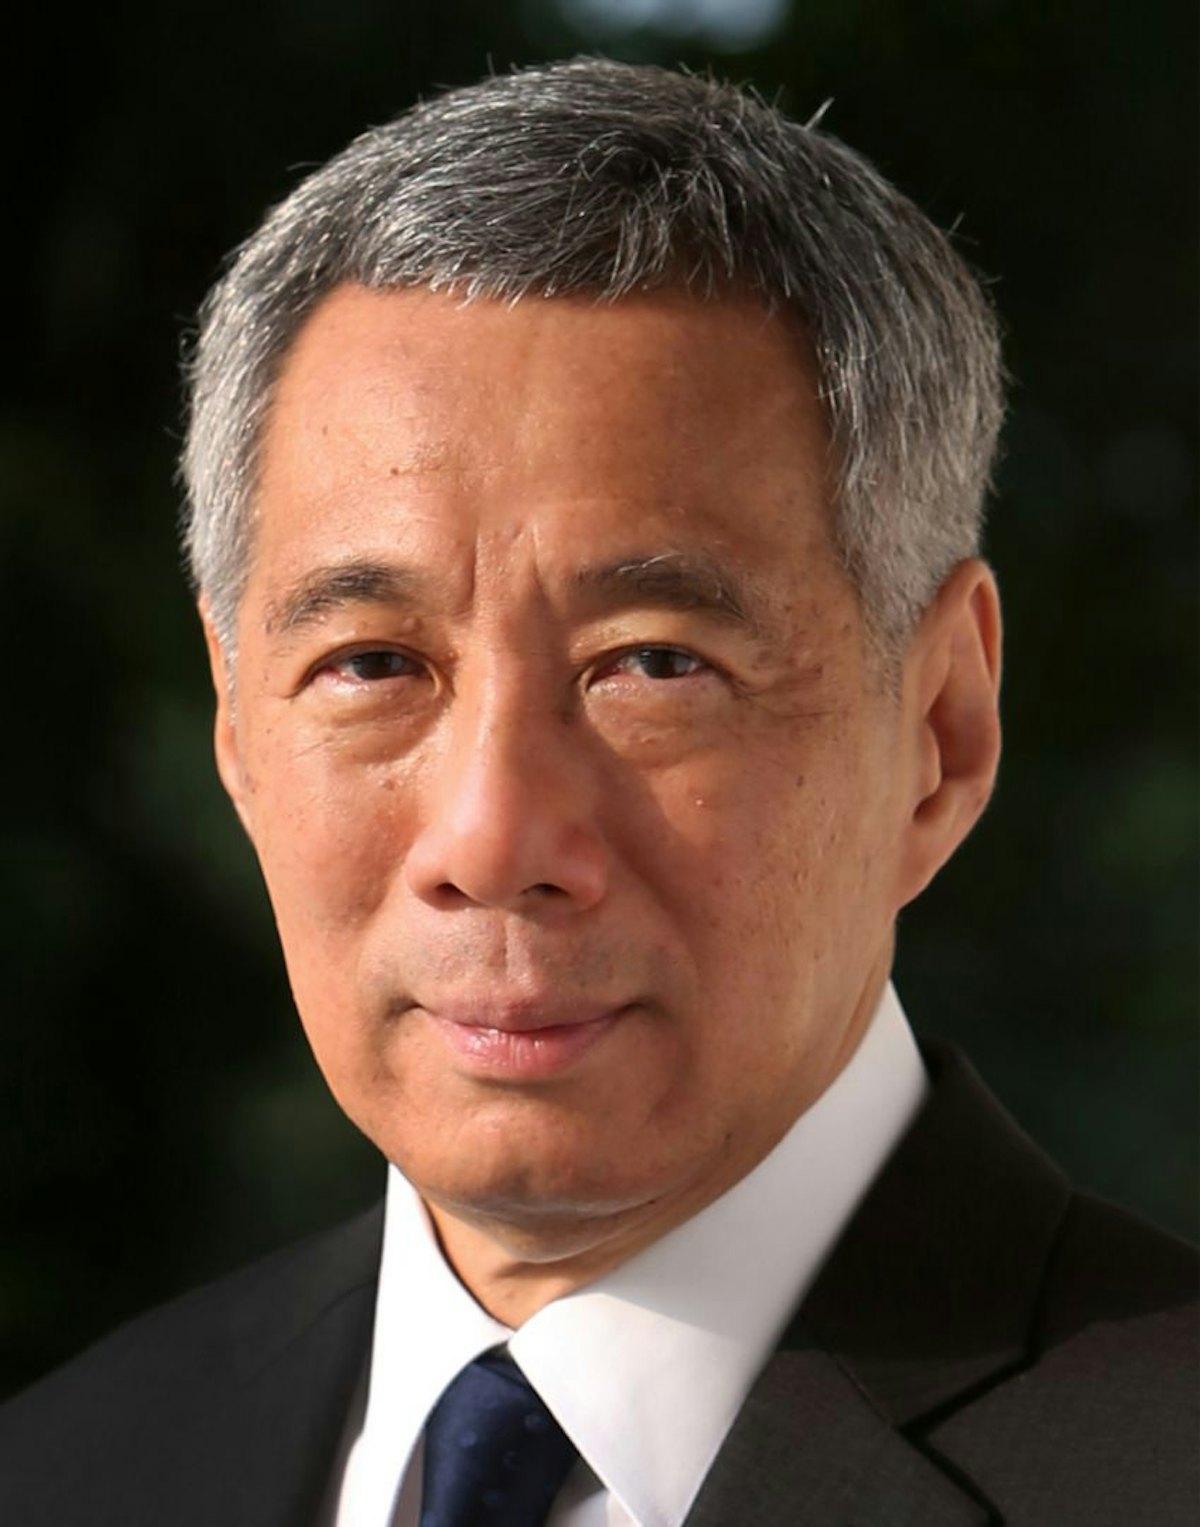 Lee Hsien Loong, Prime Minister of Singapore (Photo Credit: Ministry of Communications and Information)